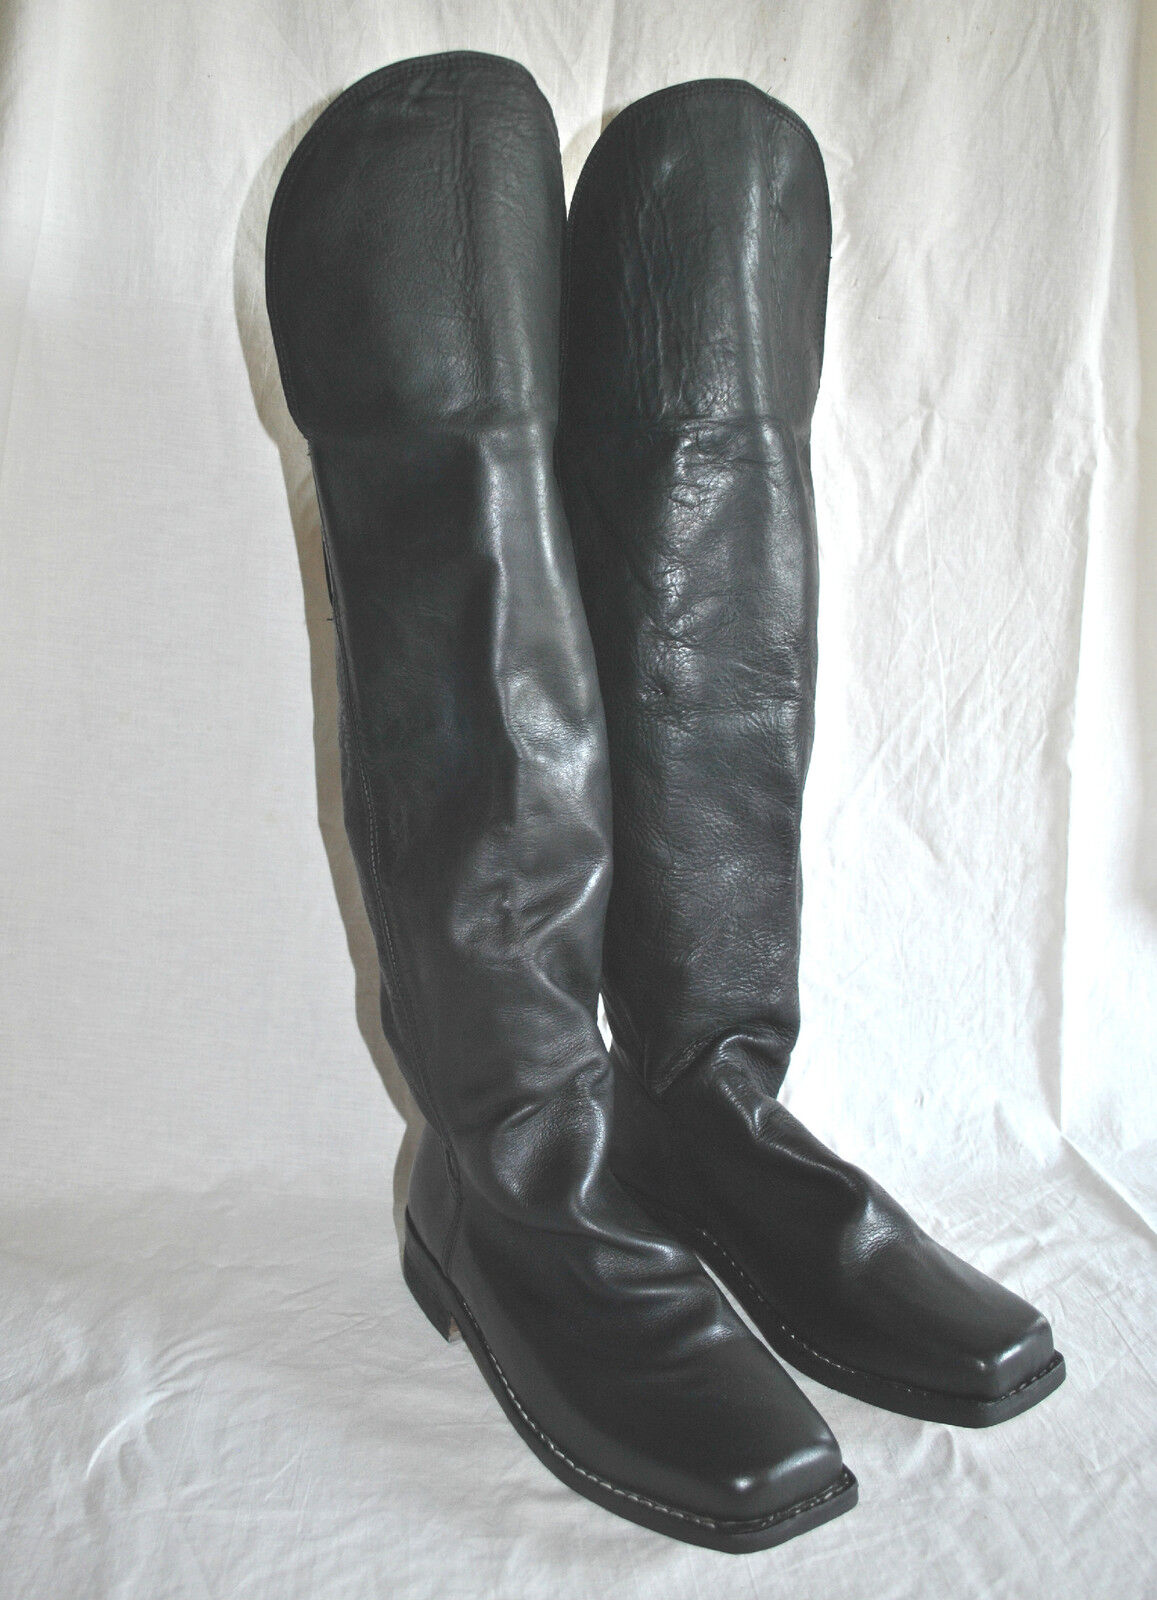 Knee Flap Boots - Size 10 - IN STOCK - Black Leather - Civil War - L@@K 